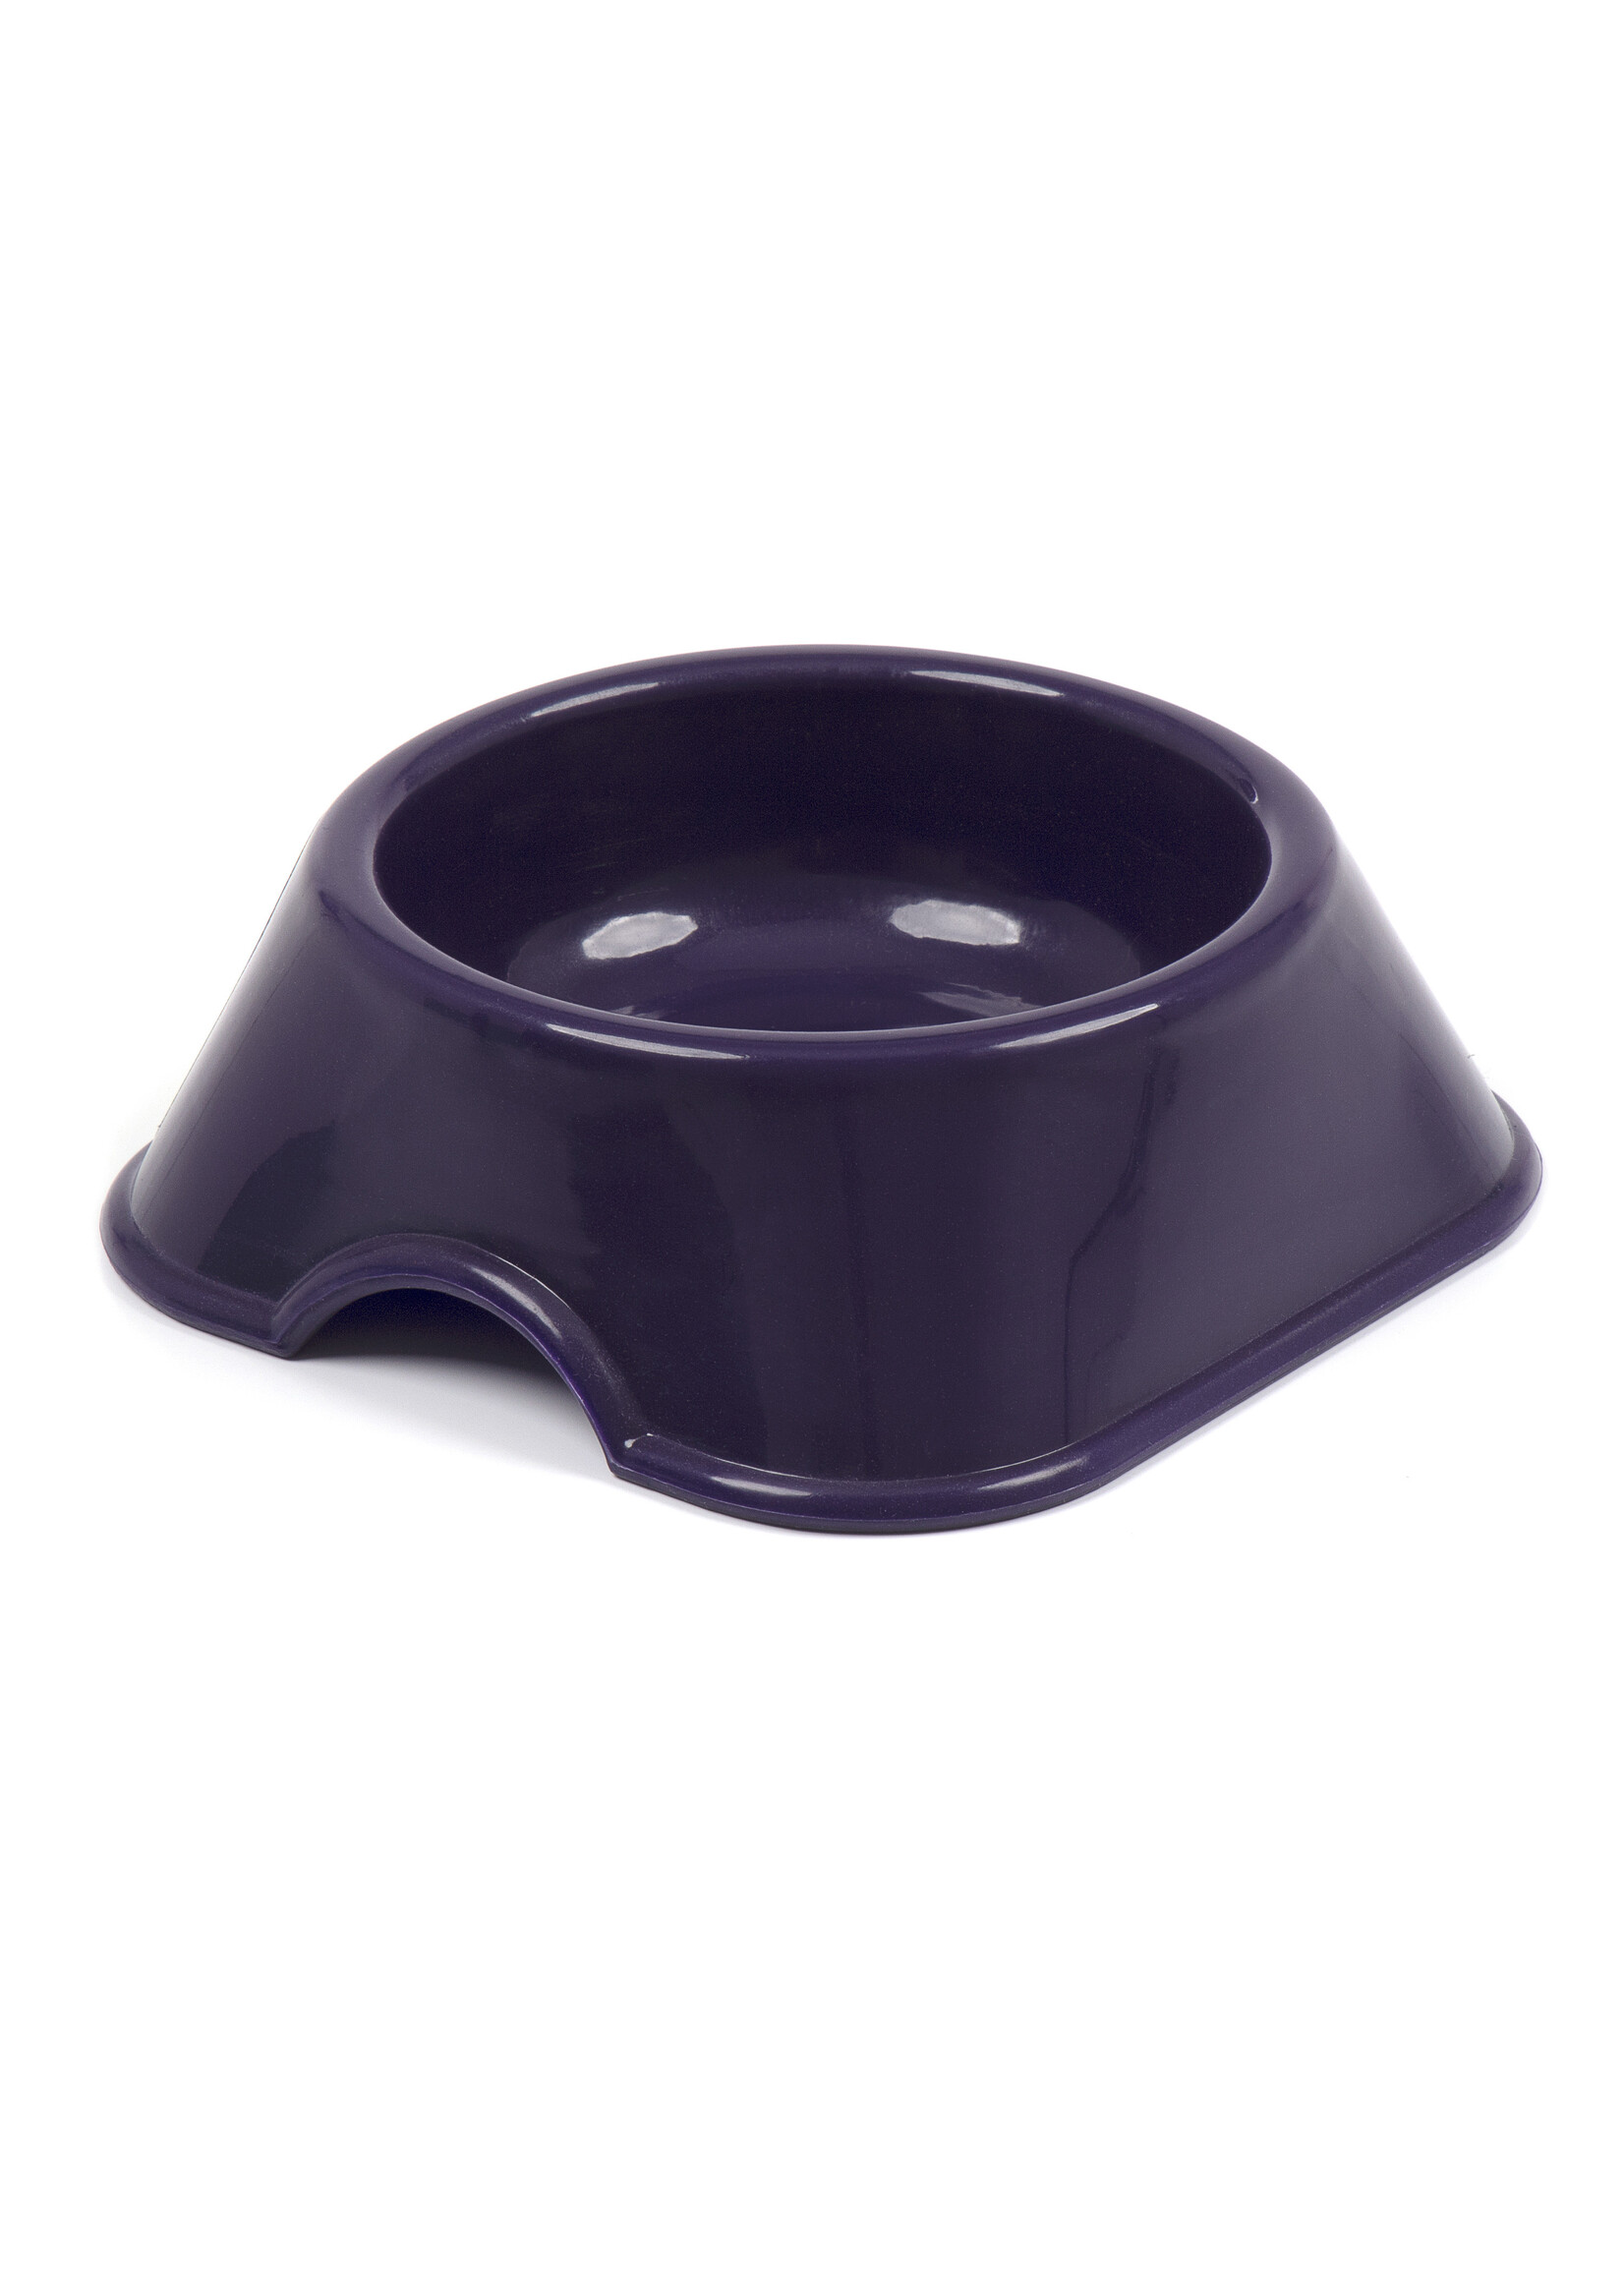 Ware Pet Products Ware Bowls Best Buy Assorted